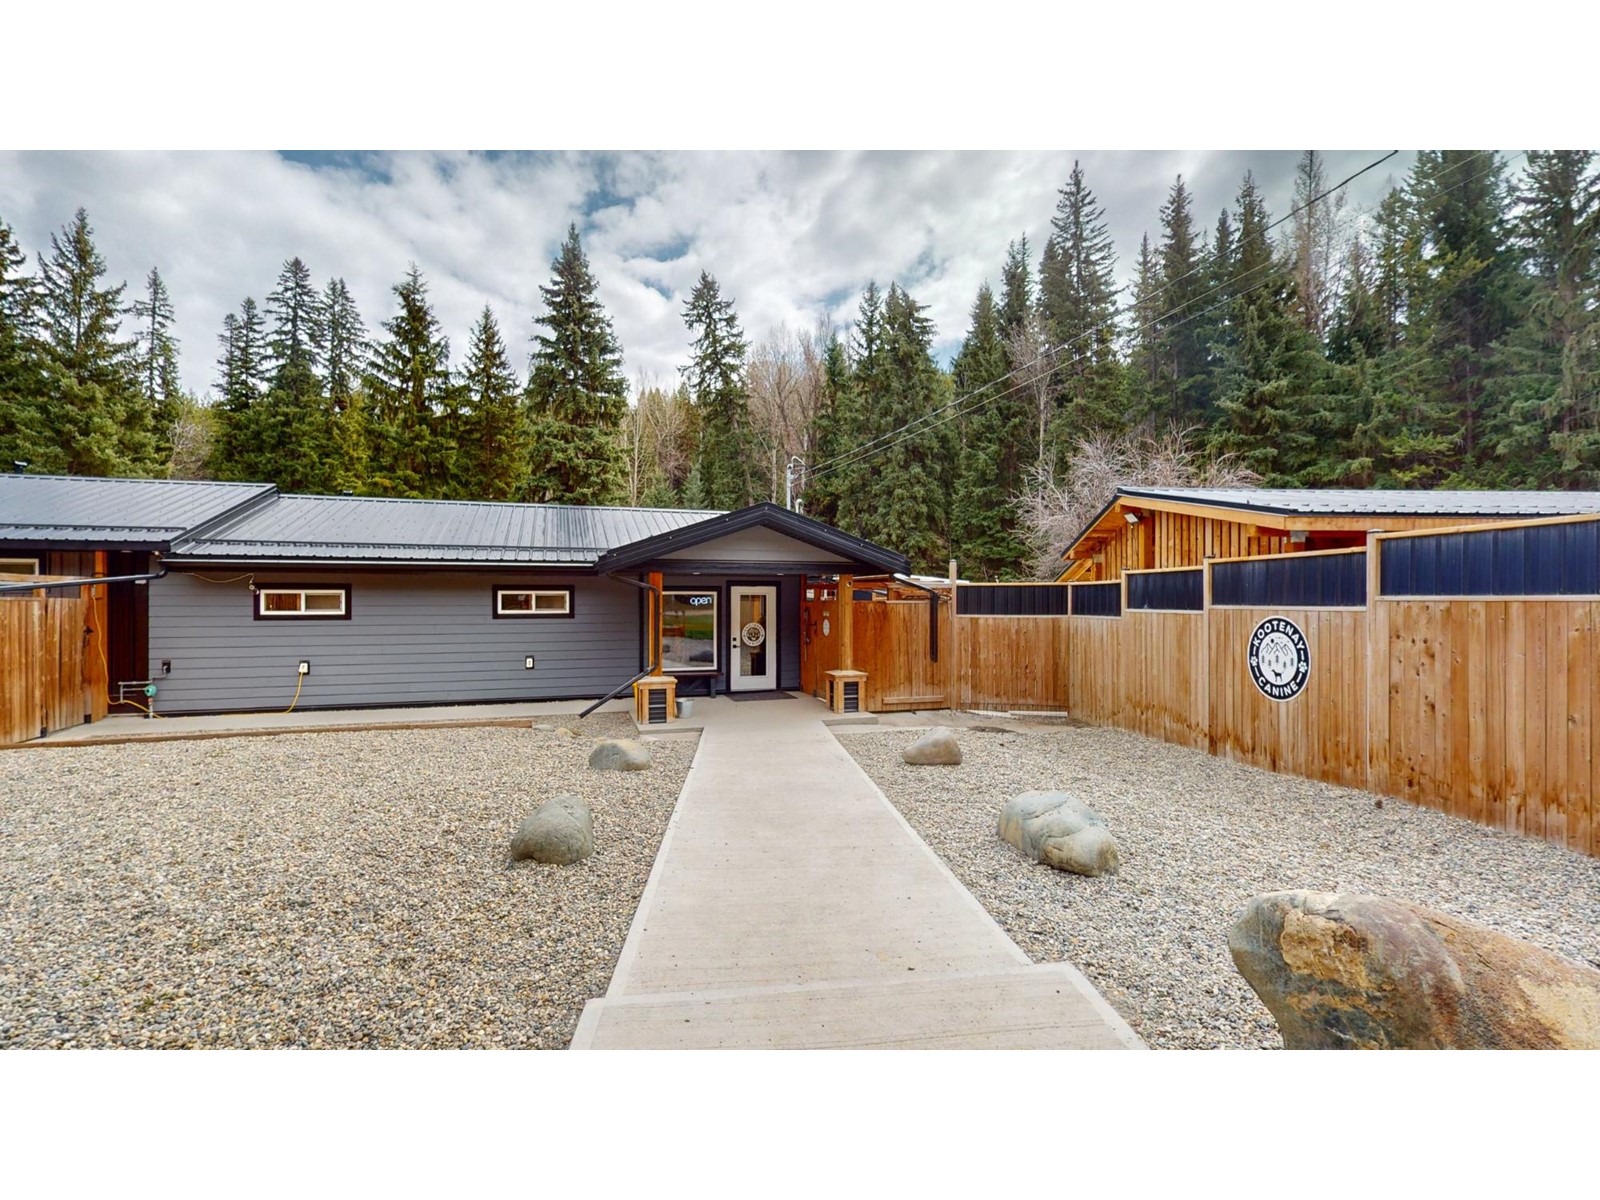 5771 WYCLIFFE PERRY CREEK ROAD, wycliffe, British Columbia